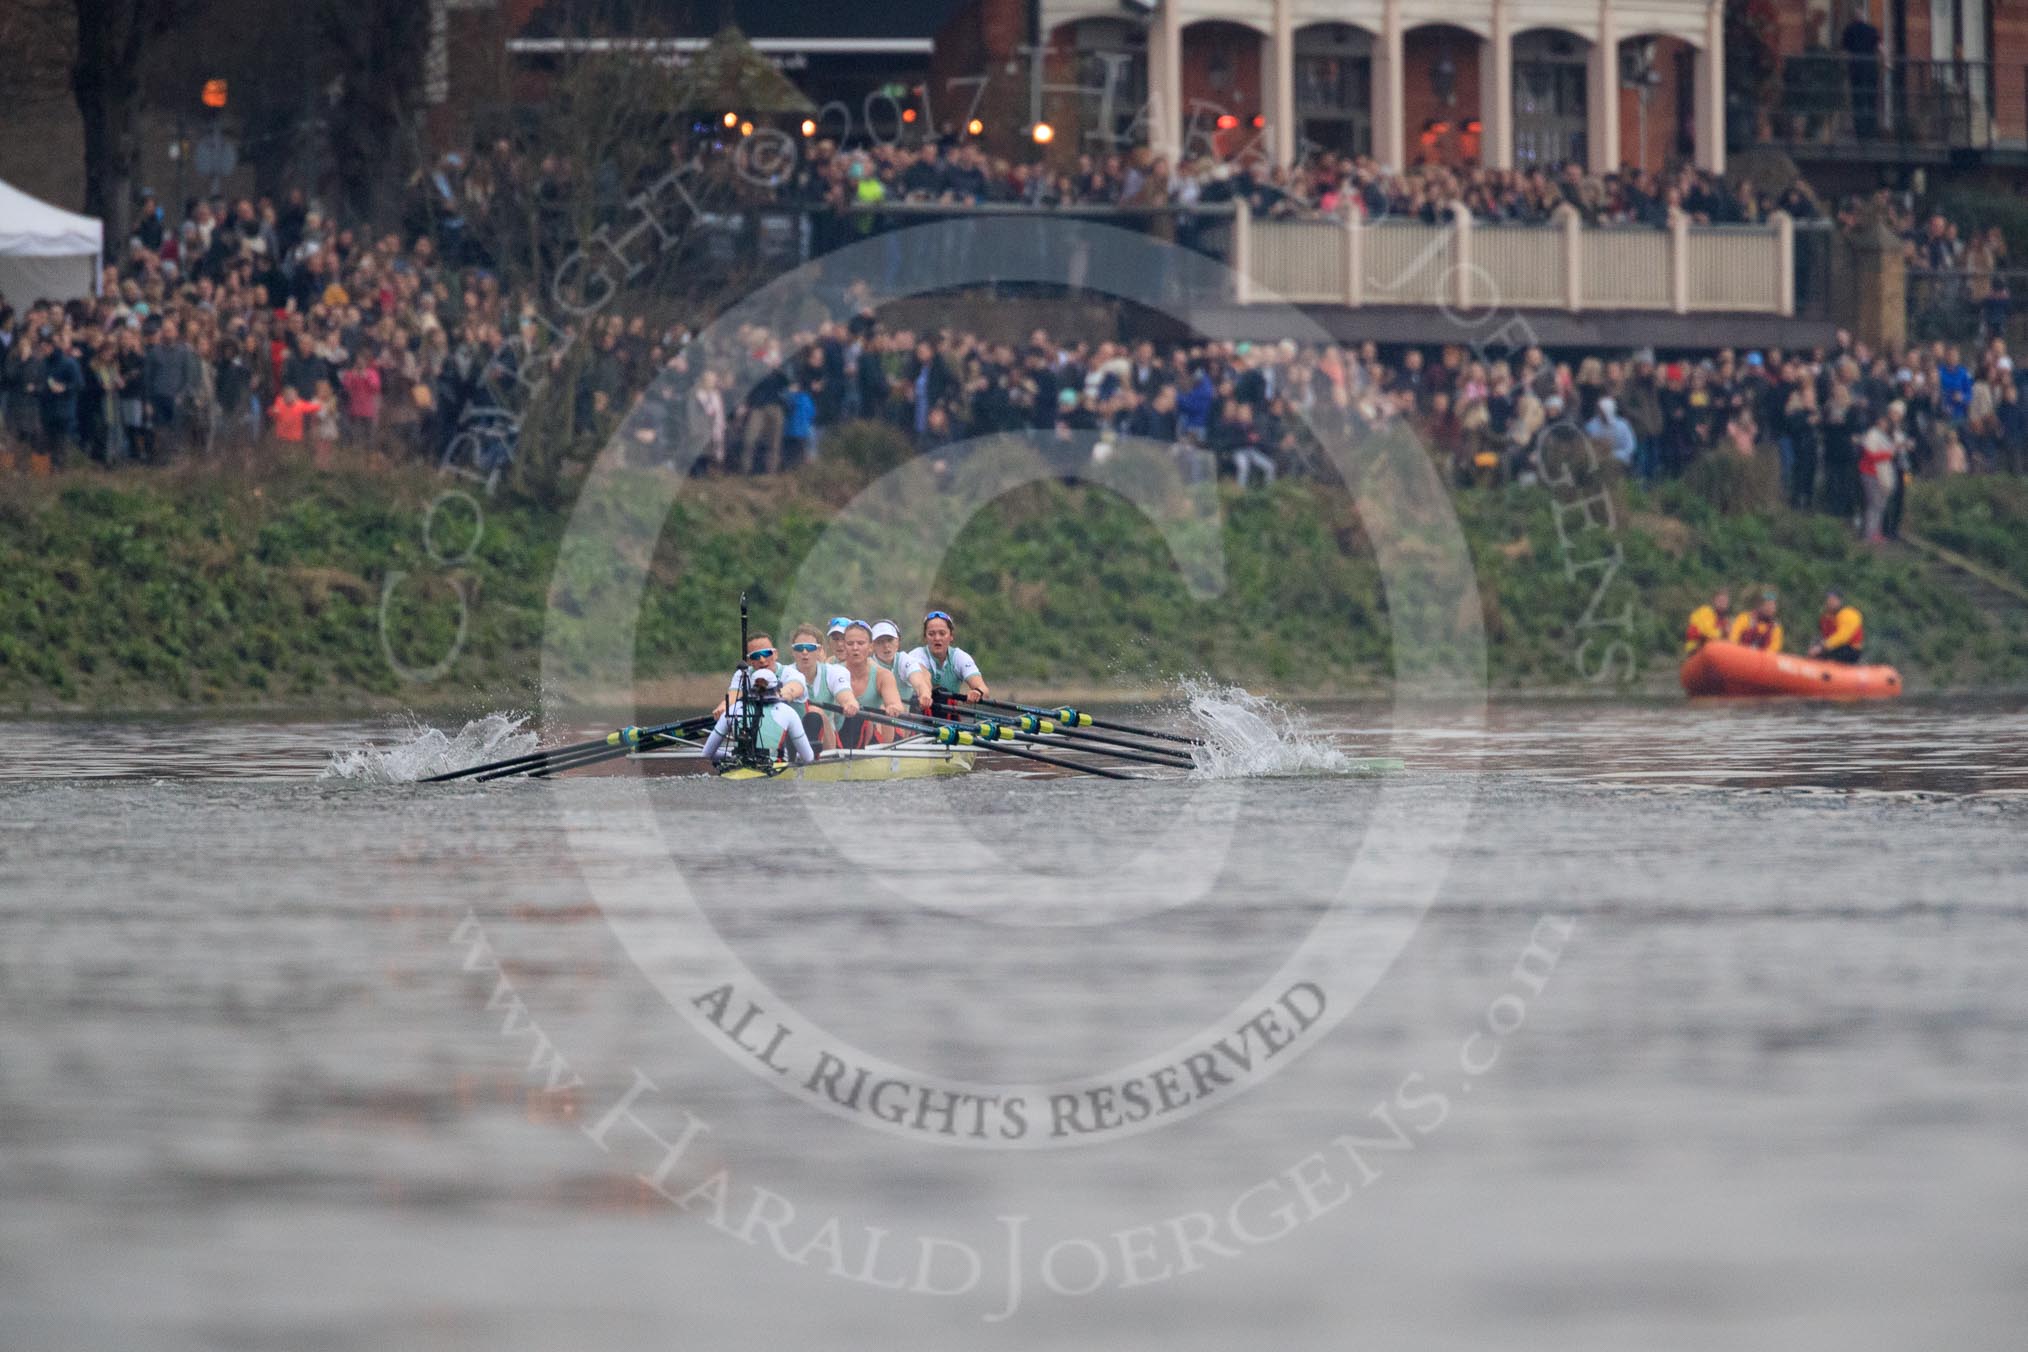 The Cancer Research UK Women's Boat Race 2018: The Cambridge boat passing the packed White Hart pub in Barnes - cox Sophie Shapter, stroke Olivia Coffey, 7 Myriam Goudet-Boukhatmi, 6 Alice White, 5 Paula Wesselmann, 4 Thea Zabell, 3 Kelsey Barolak, 2	Imogen Grant, bow Tricia Smith.
River Thames between Putney Bridge and Mortlake,
London SW15,

United Kingdom,
on 24 March 2018 at 16:47, image #198